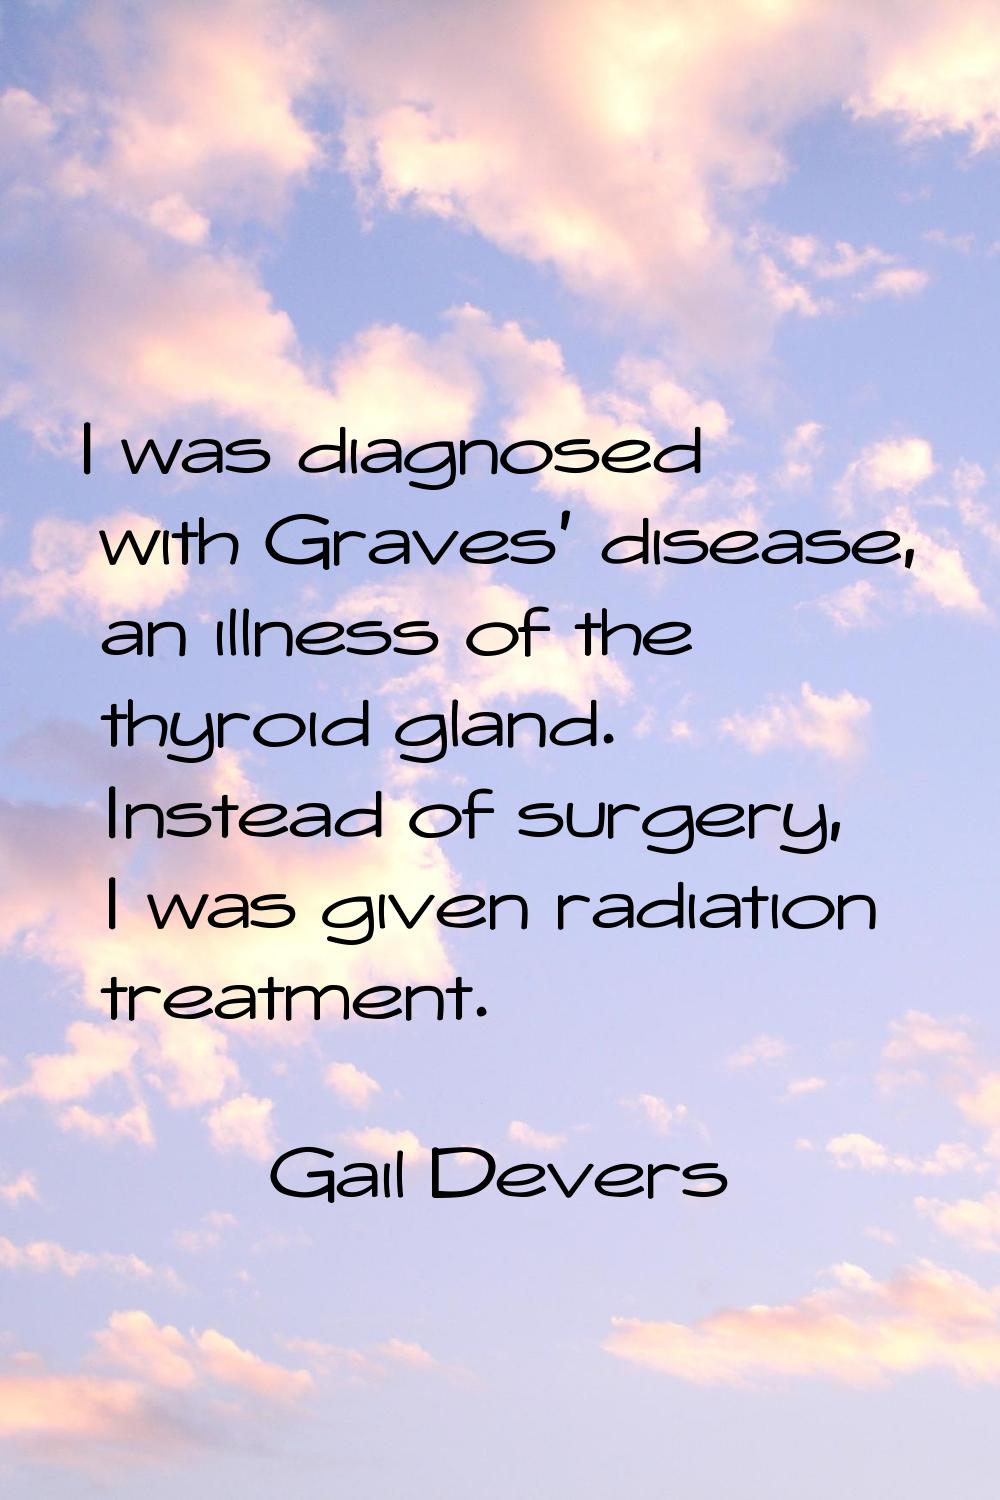 I was diagnosed with Graves' disease, an illness of the thyroid gland. Instead of surgery, I was gi